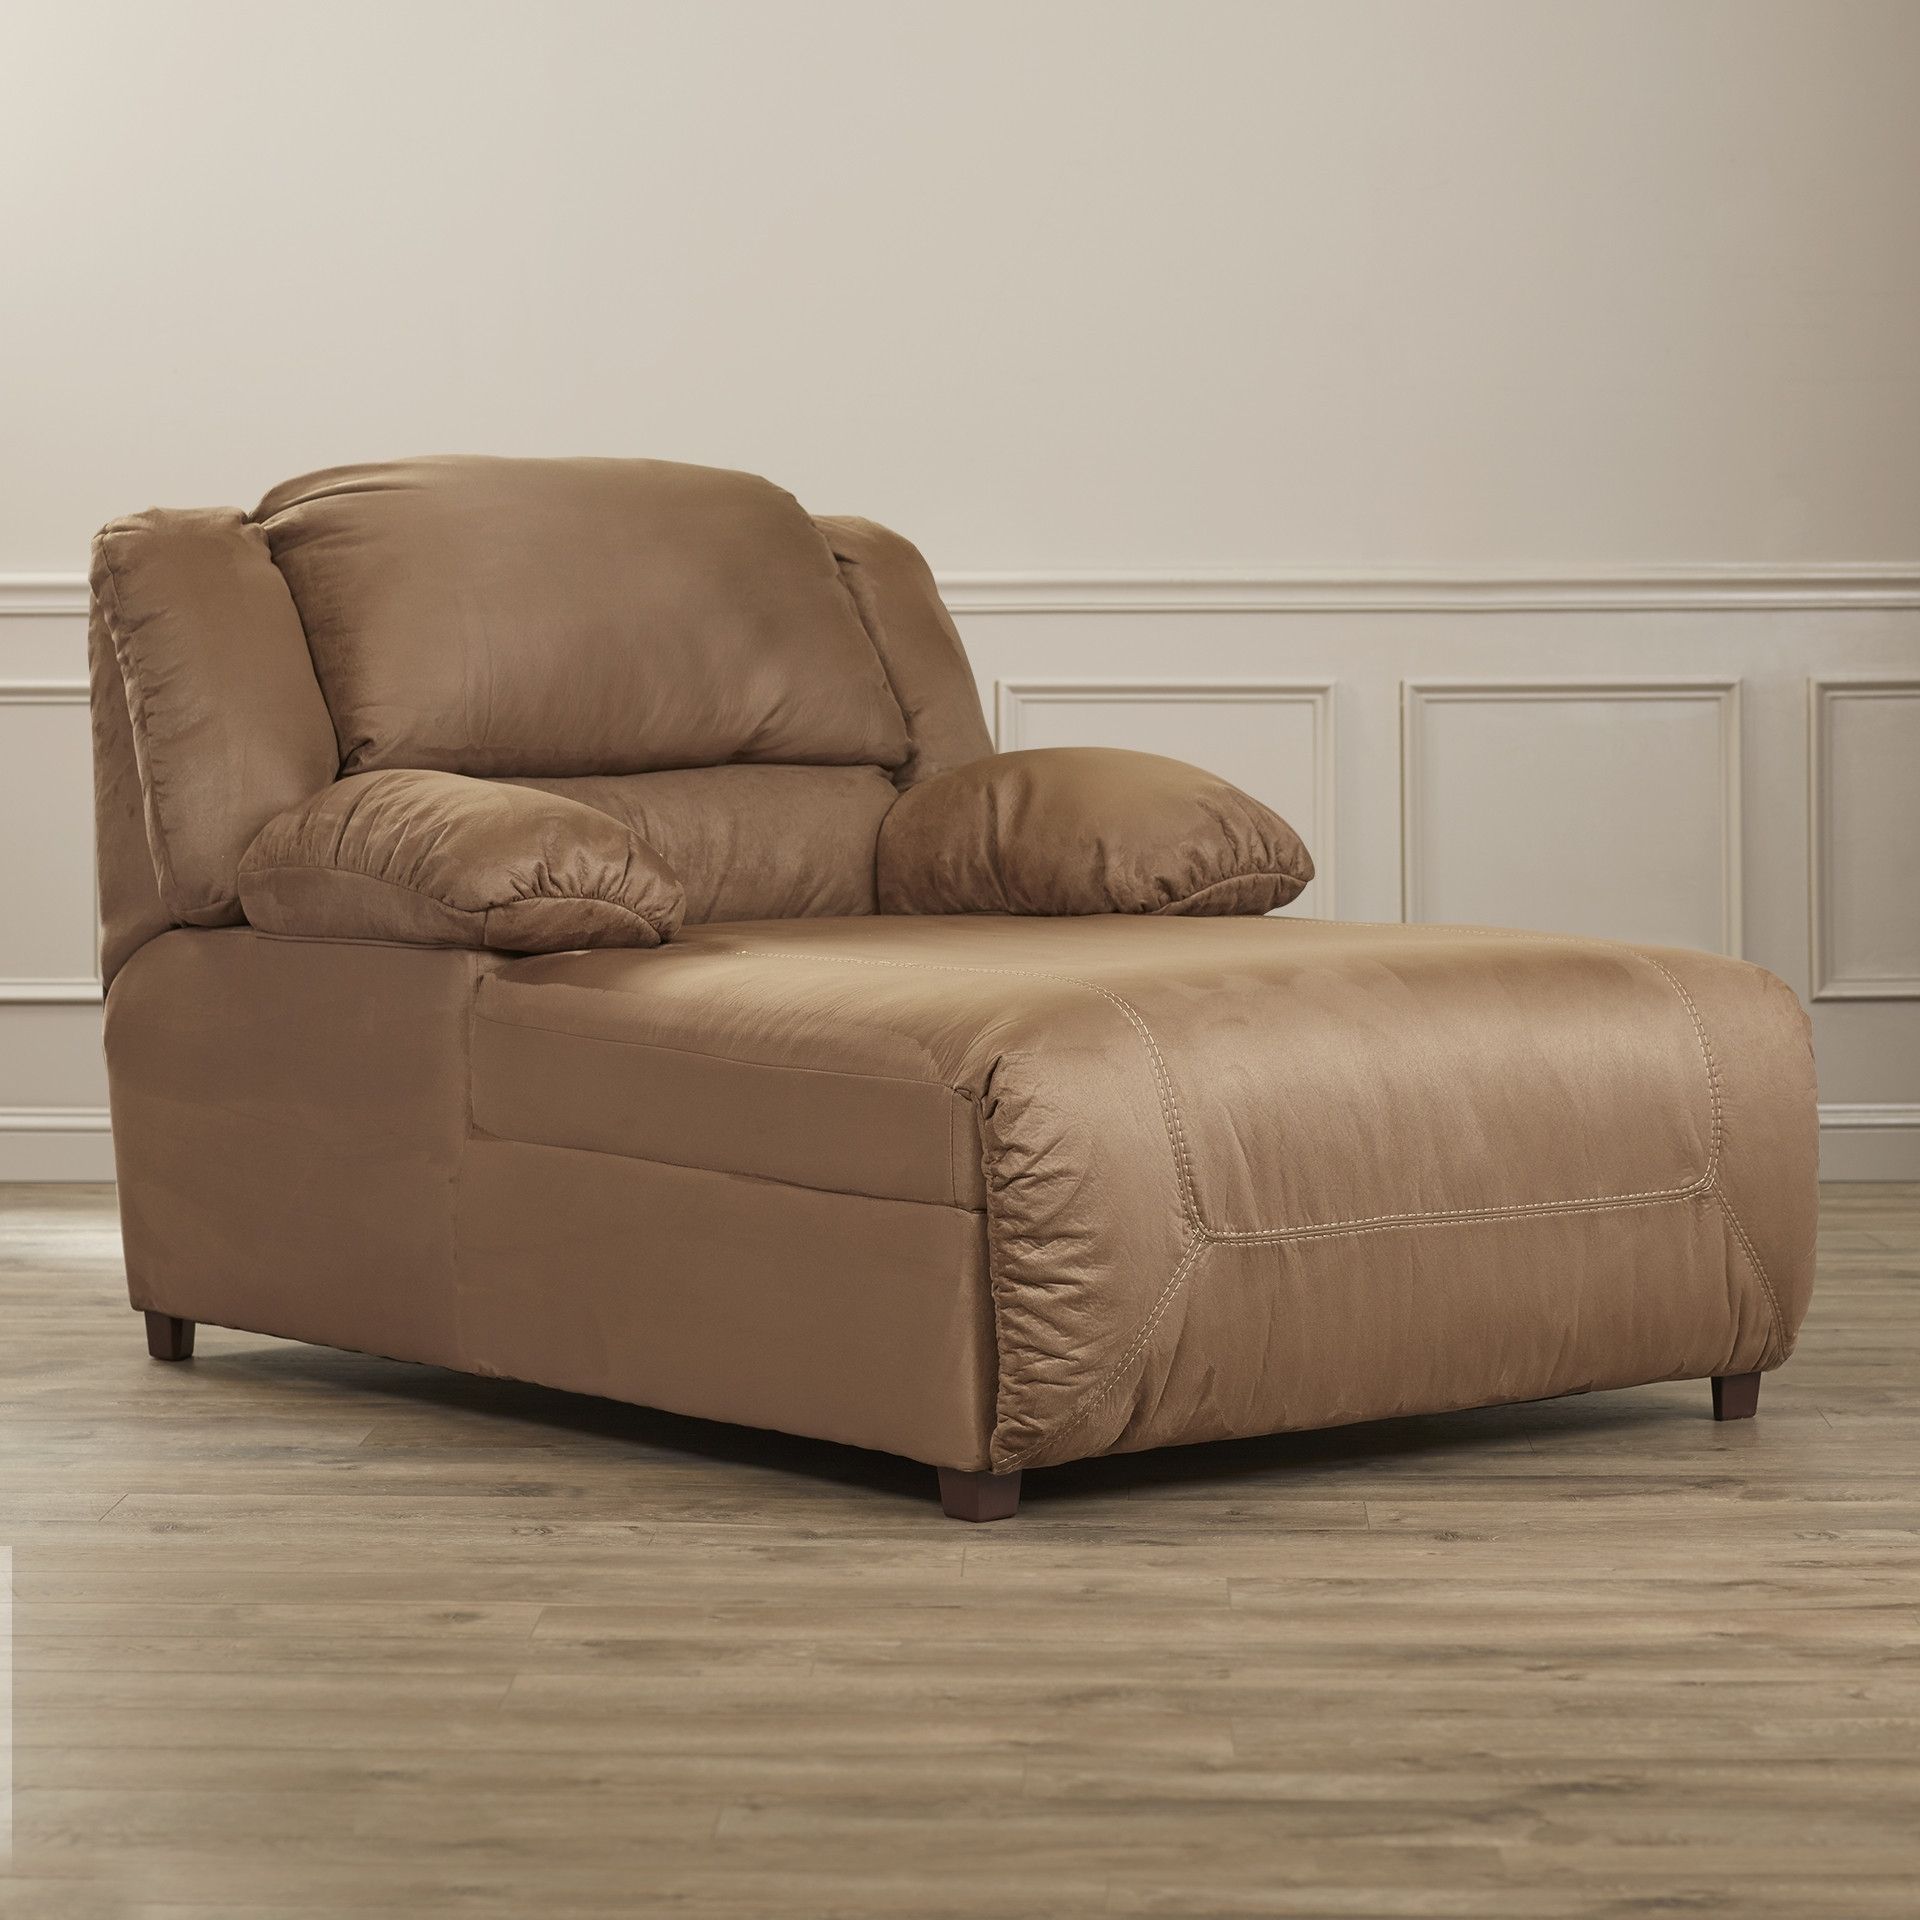 Favorite Microfiber Chaise Lounges Pertaining To Awesome Microfiber Chaise Lounge Chair – Home (View 1 of 15)